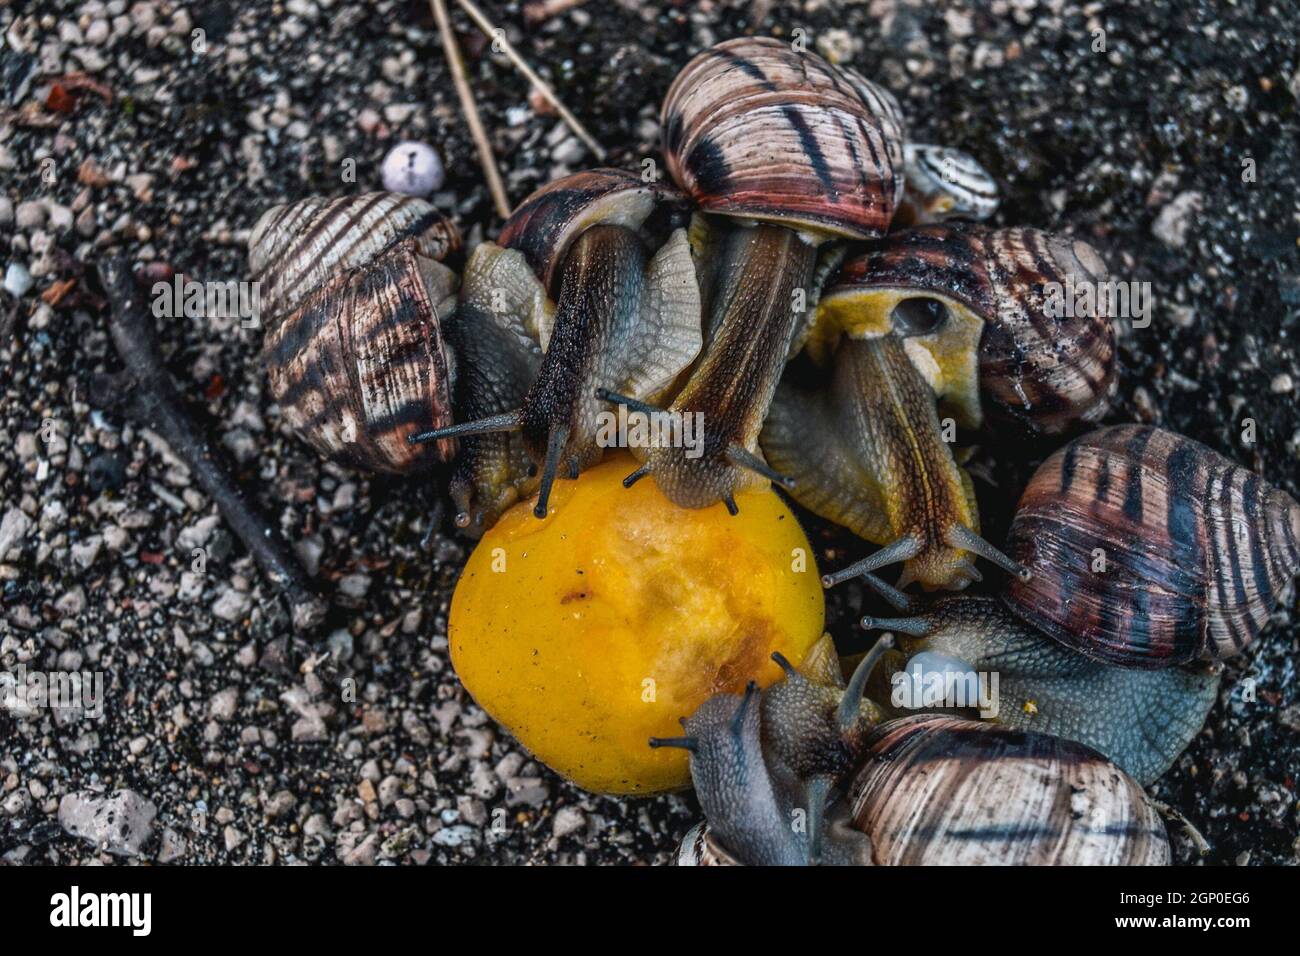 The snails eat an orange. Feeding large snails with citrus fruits. Stock Photo